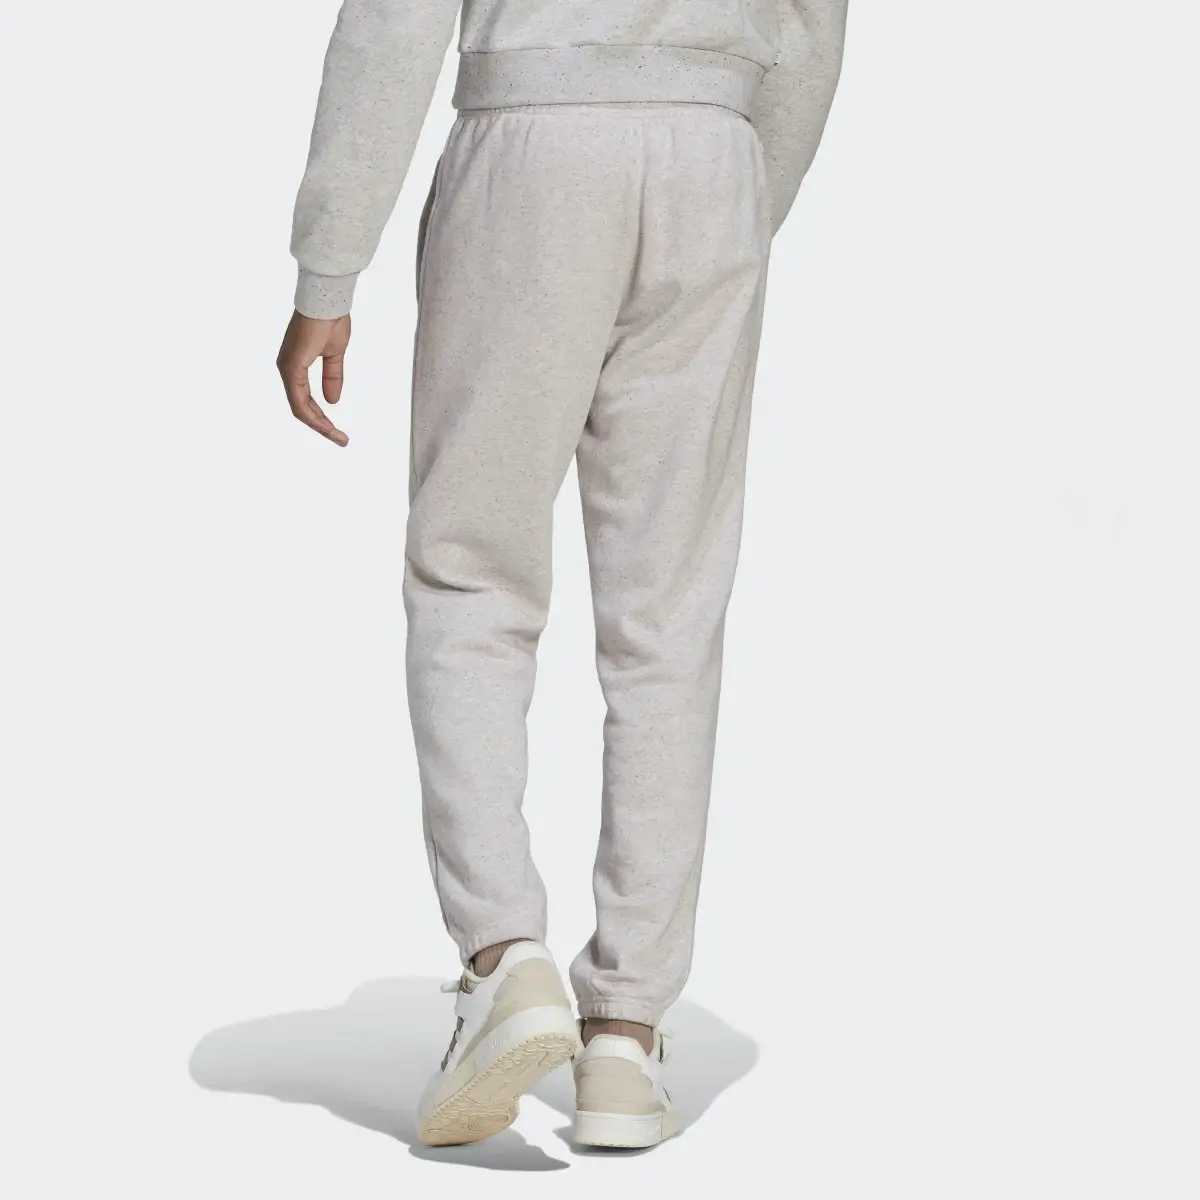 Adidas Essentials+ Made with Nature Sweat Joggers. 3